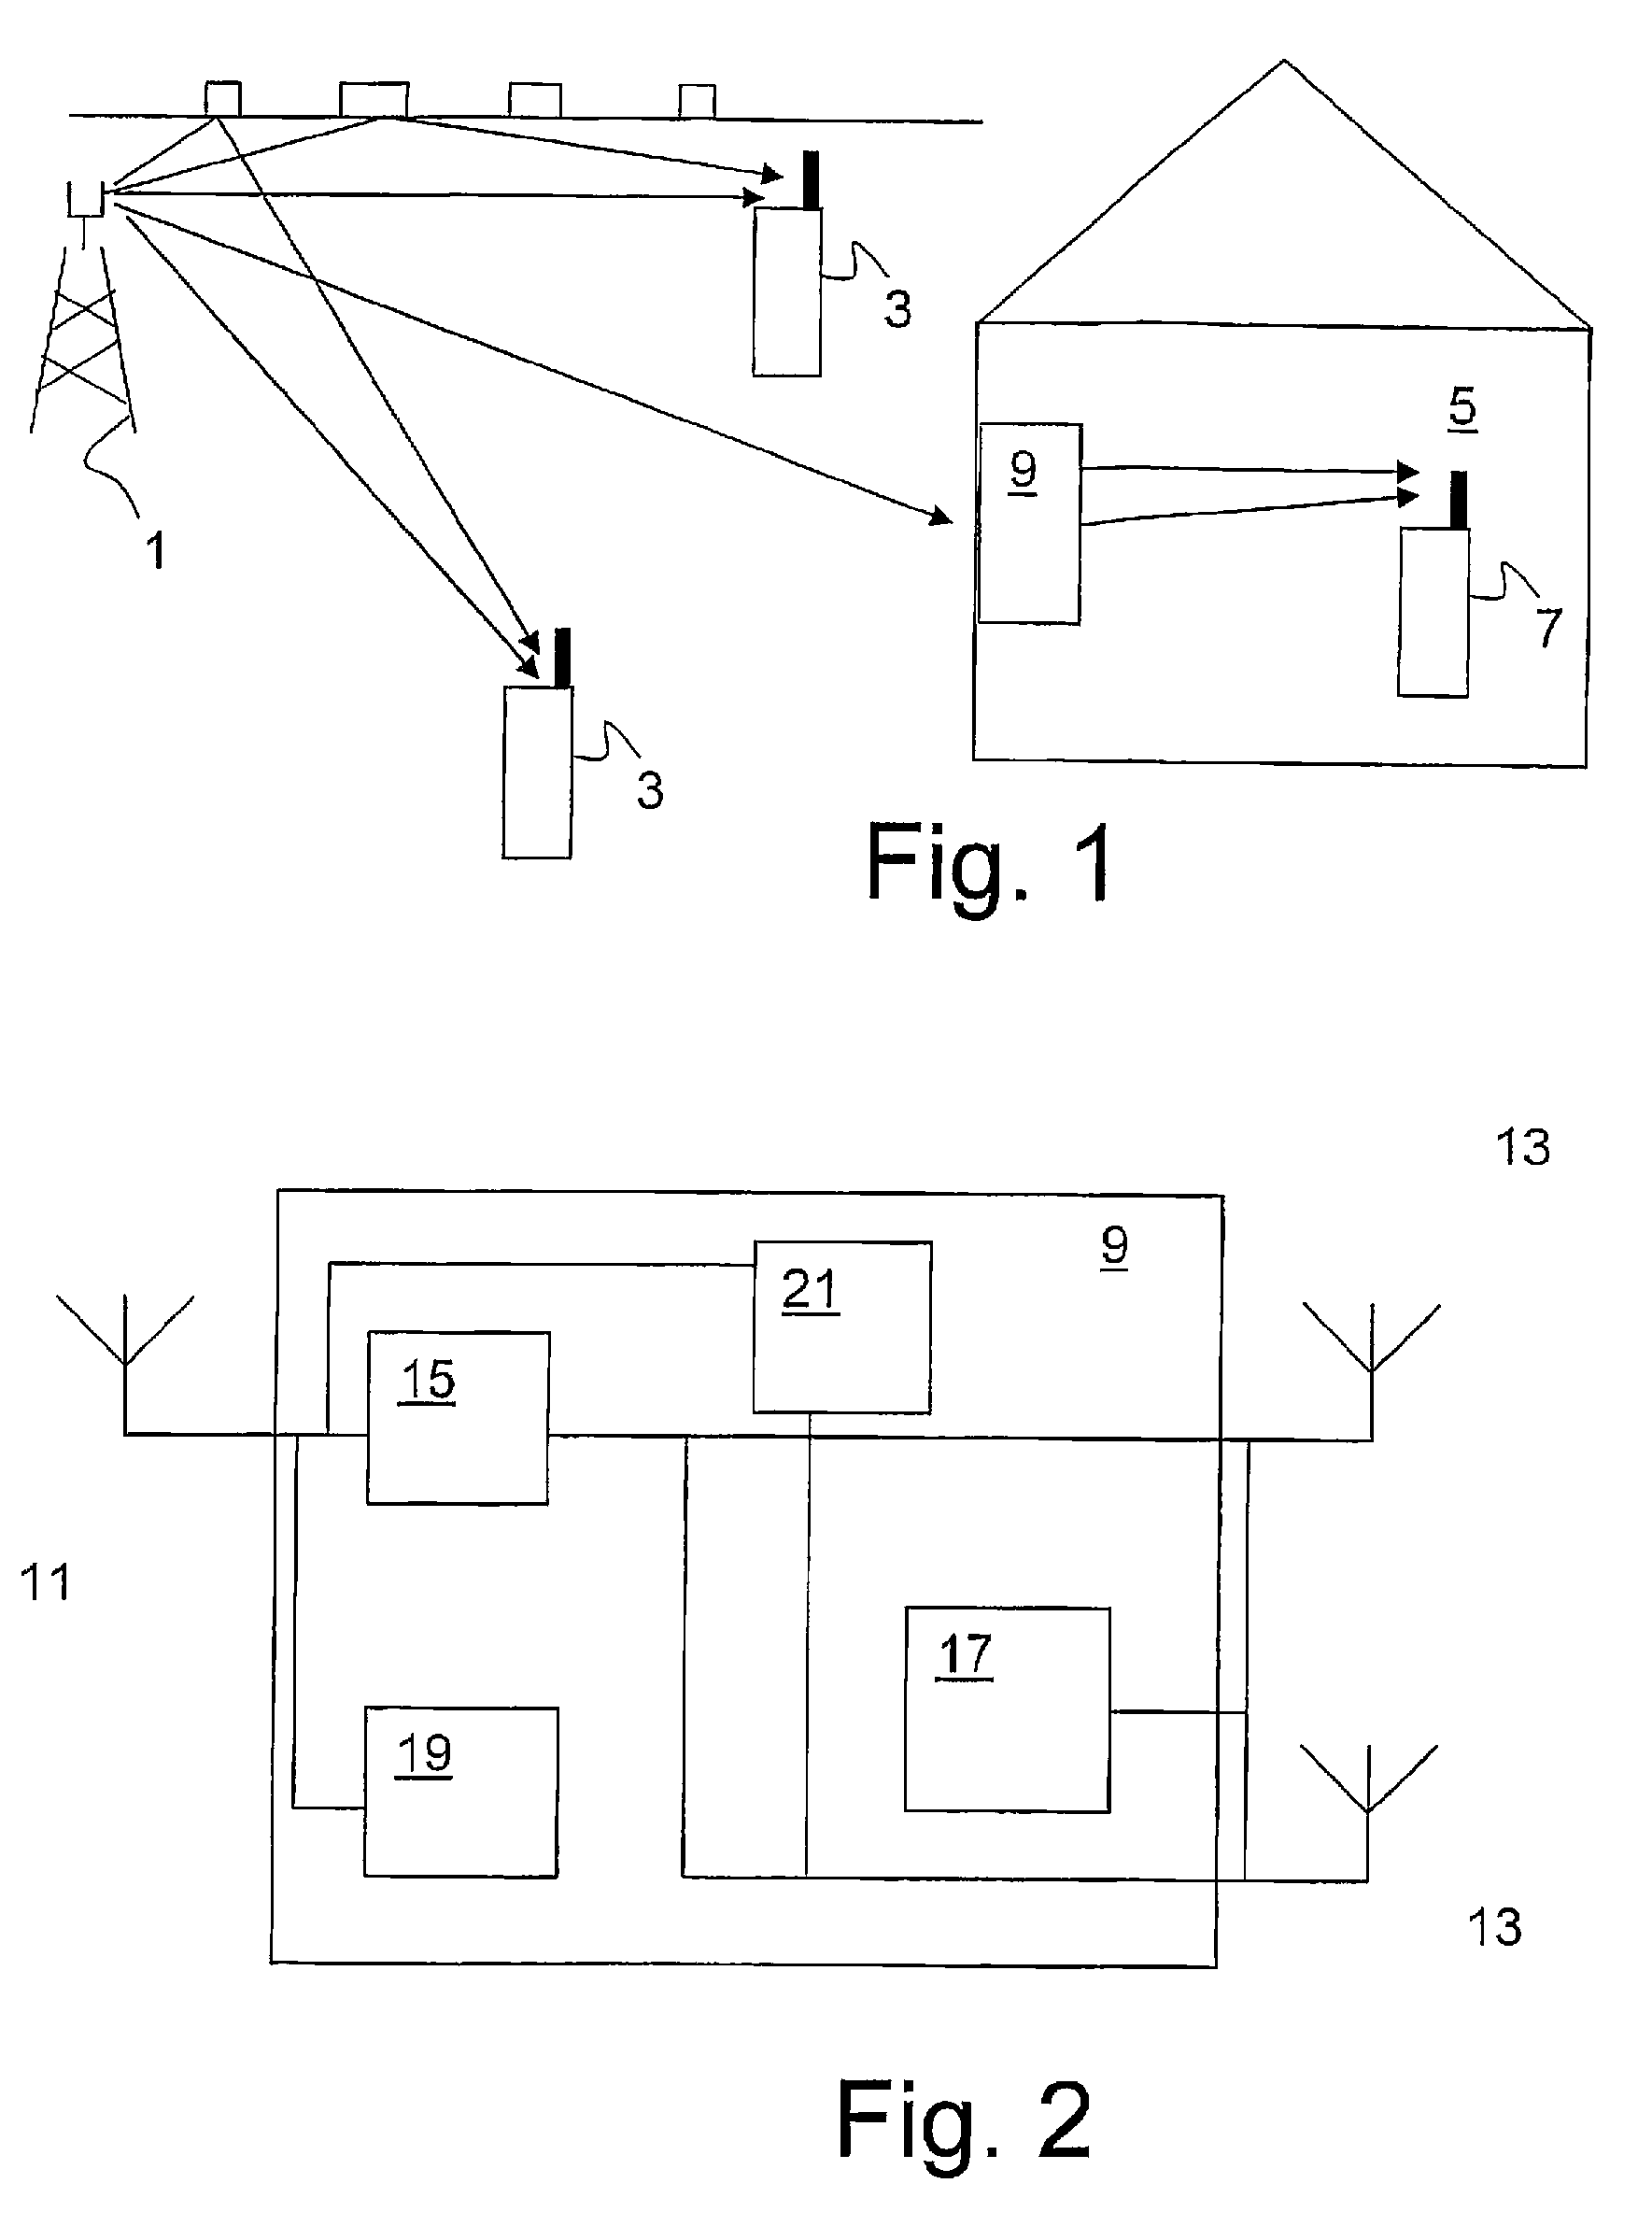 Method and apparatus for repeating a signal in a wireless communication system